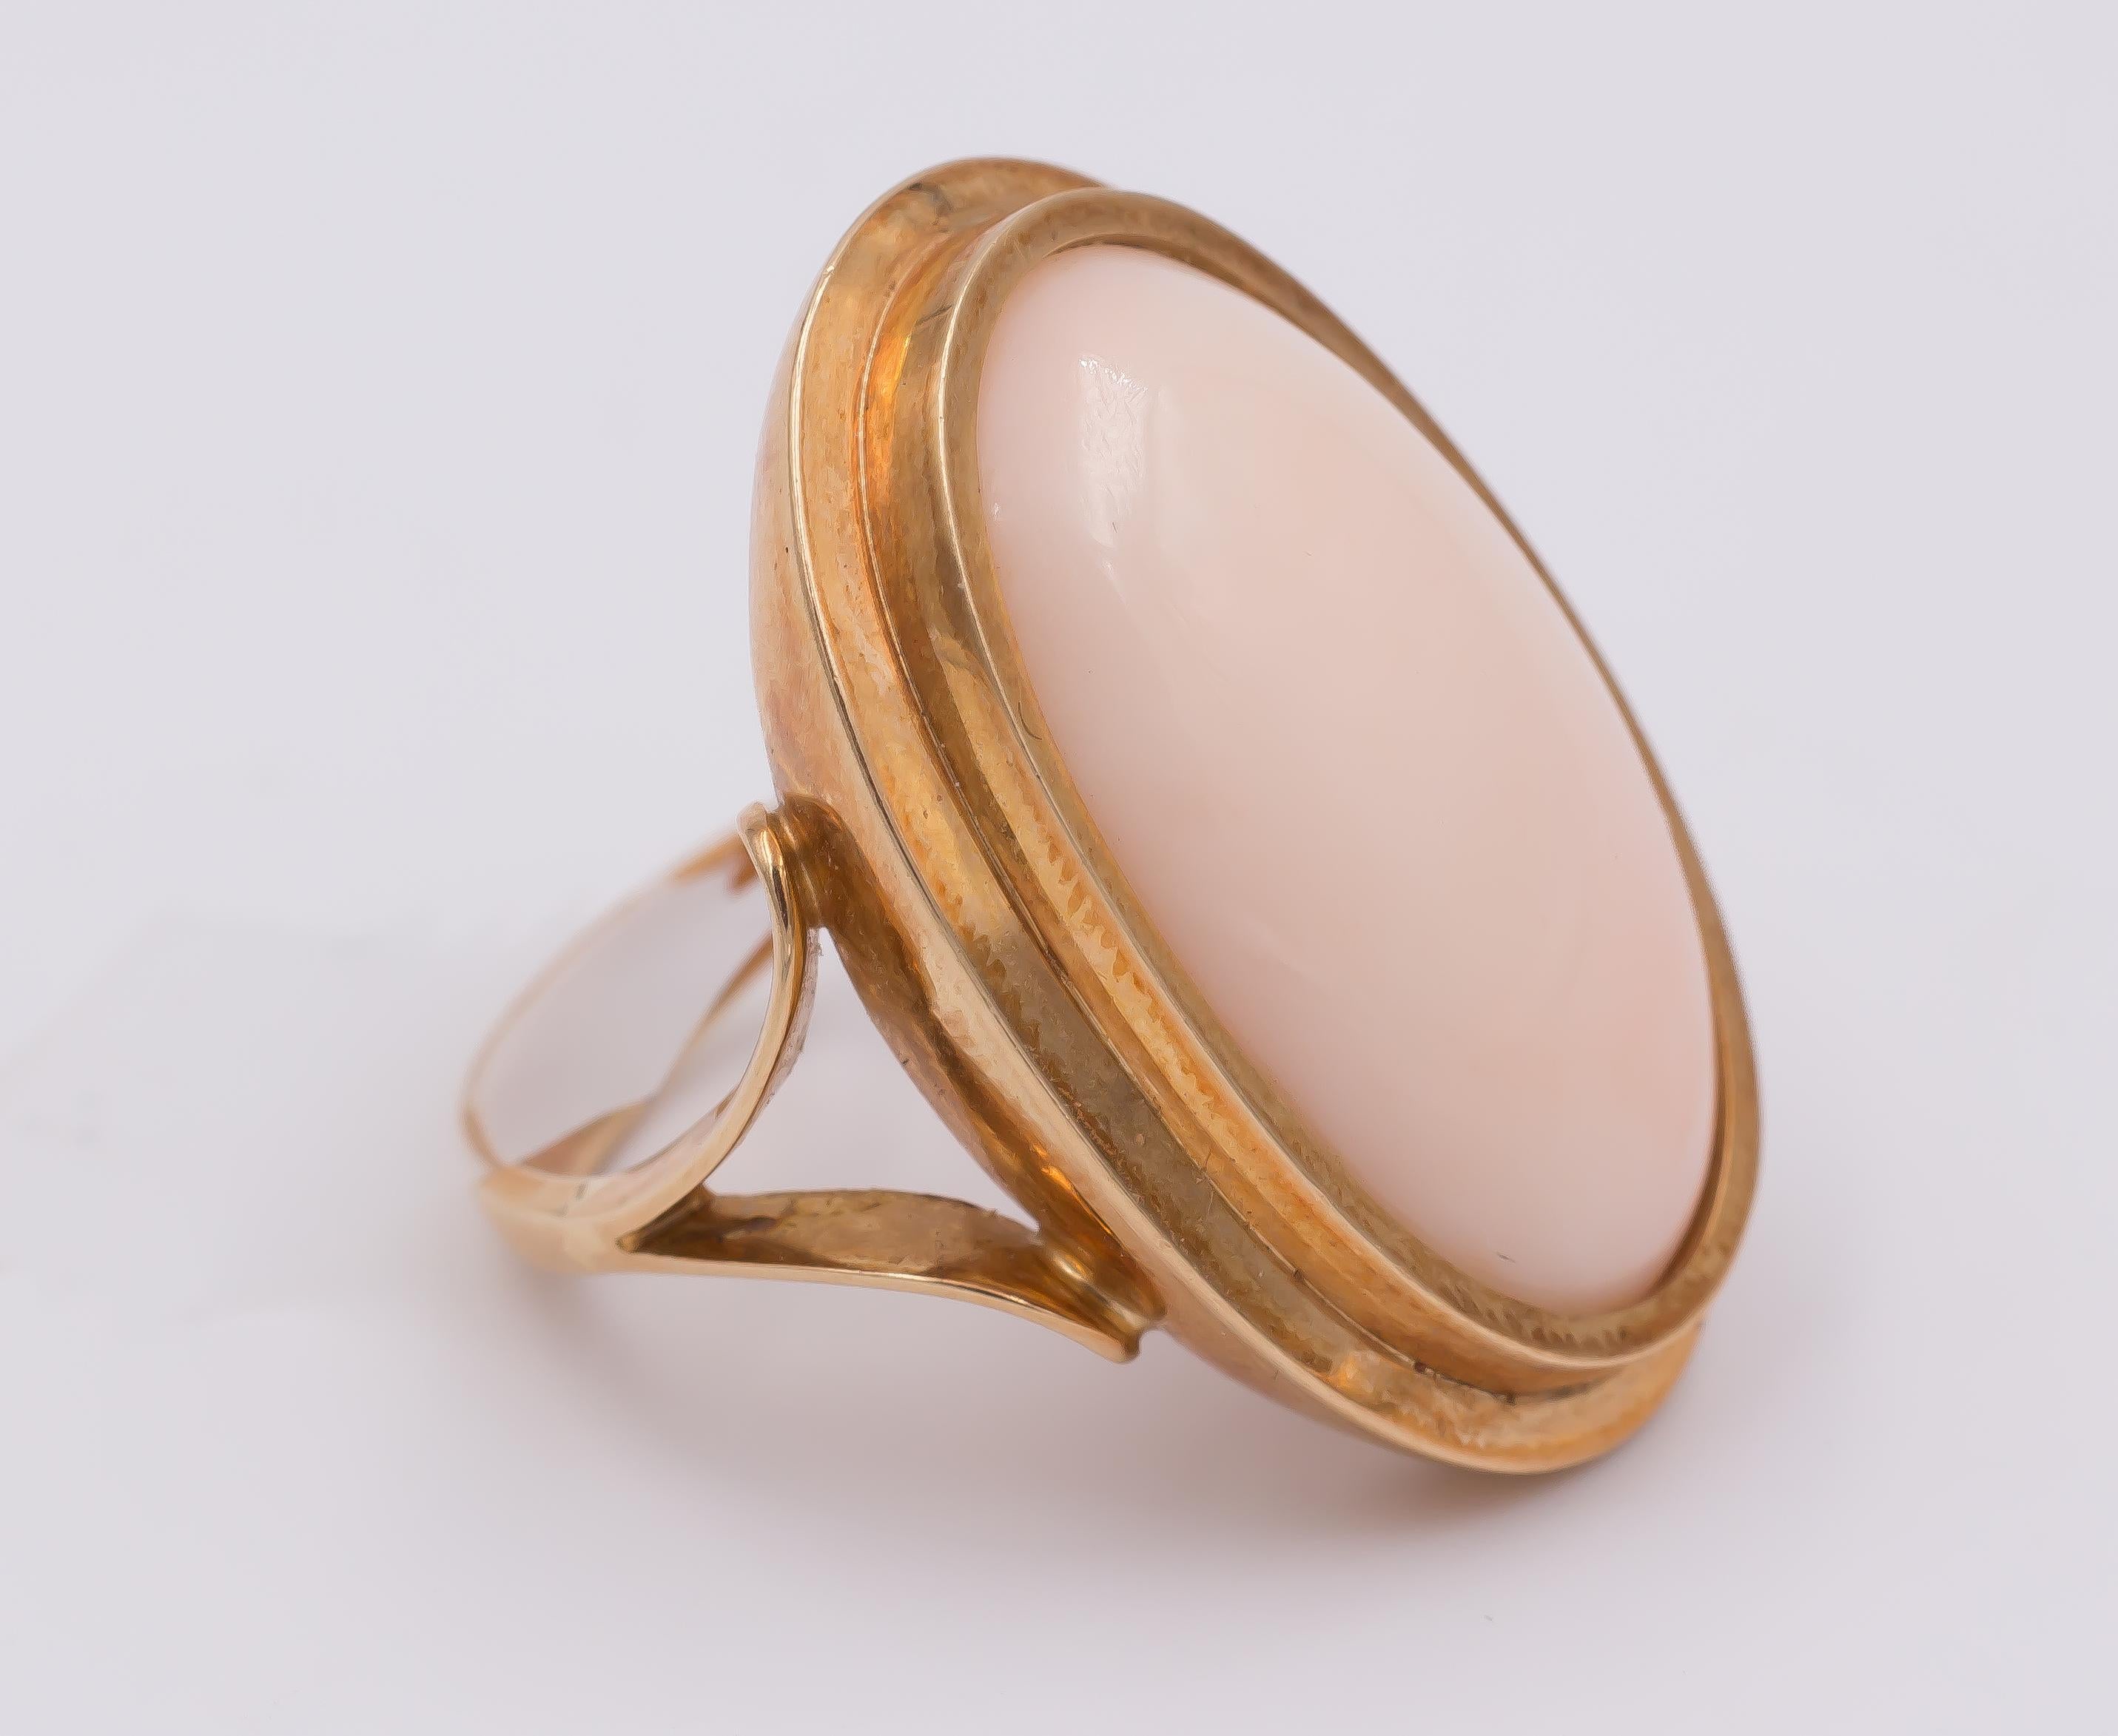 This fine ring is set with an oval rose coral, and it's mounted in a yellow gold mount, with split shoulders. The ring is vintage and dates from the 1950s. 

MATERIALS
18K gold and rose oval coral

DIMENSIONS
Coral dimensions: 2.4 x 1.5 cm

RING